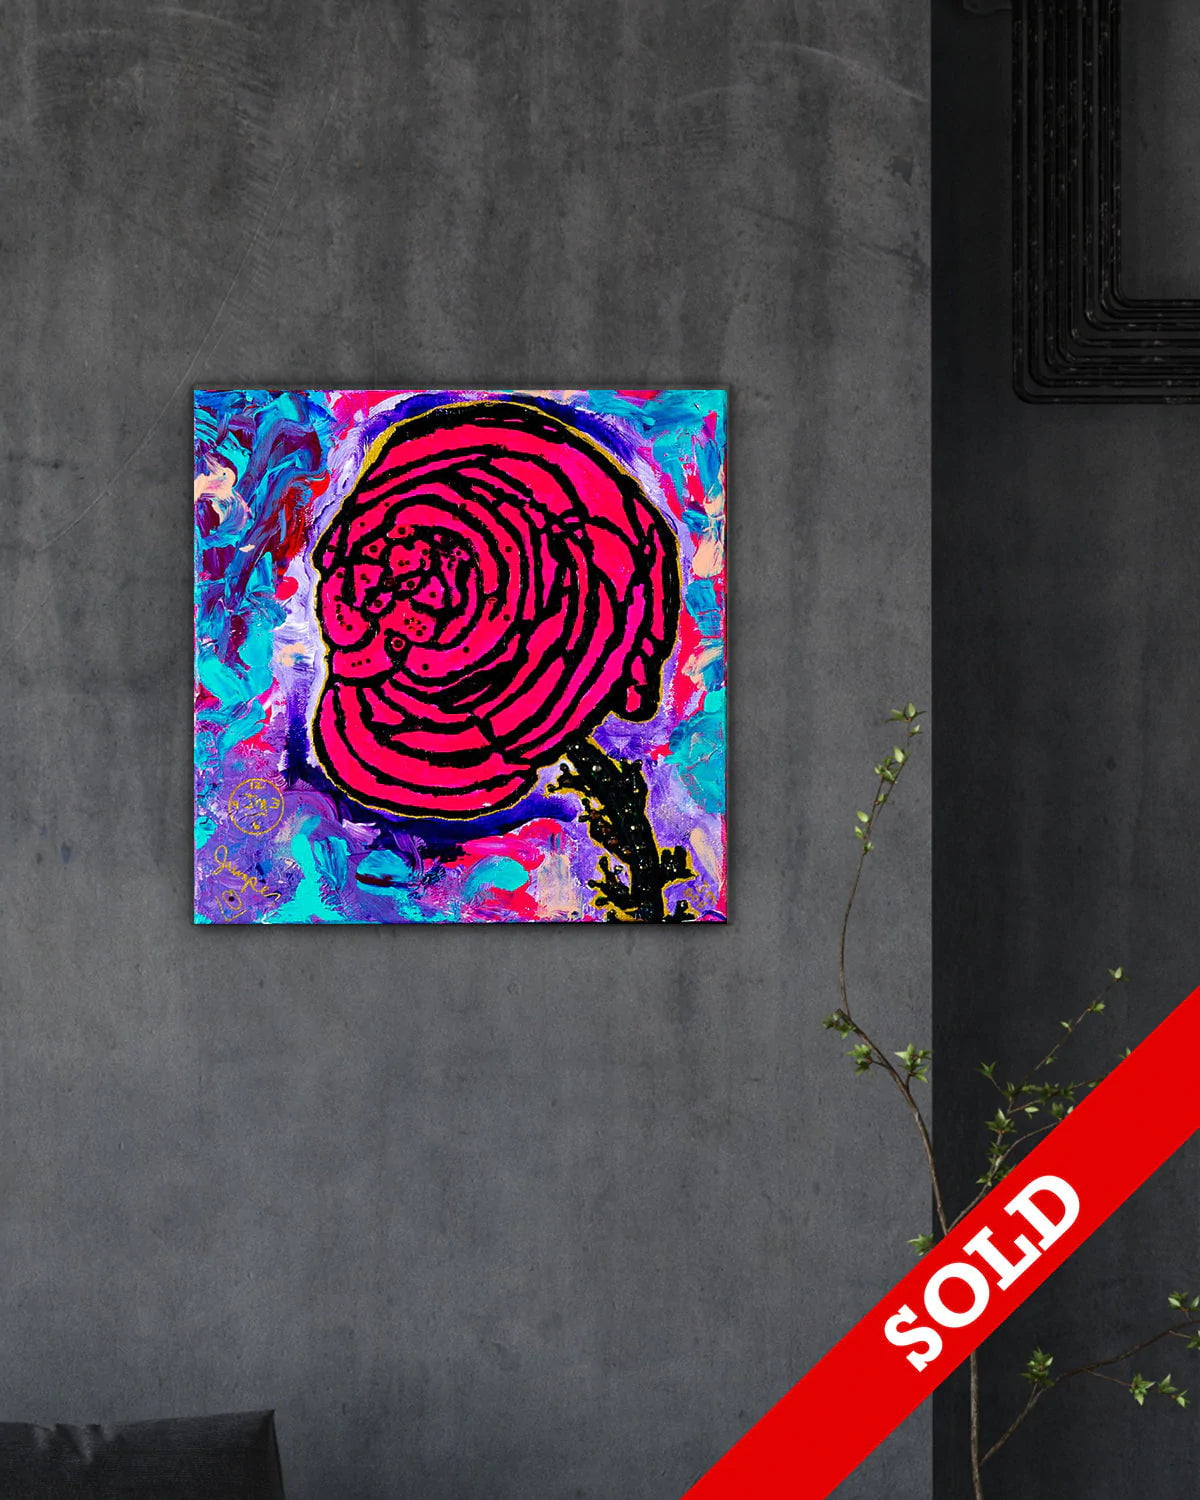 Cotton Candy Rose by Jumper Maybach
From the Cotton Candy Series
Sweet Nature
12" x 12"
Acrylic mixed media on Canvas

Do you own a Jumper Maybach, yet?®
Seek LOVE, Cotton Candy Rose        PNTArtworkJumper MaybachJumper Maybach